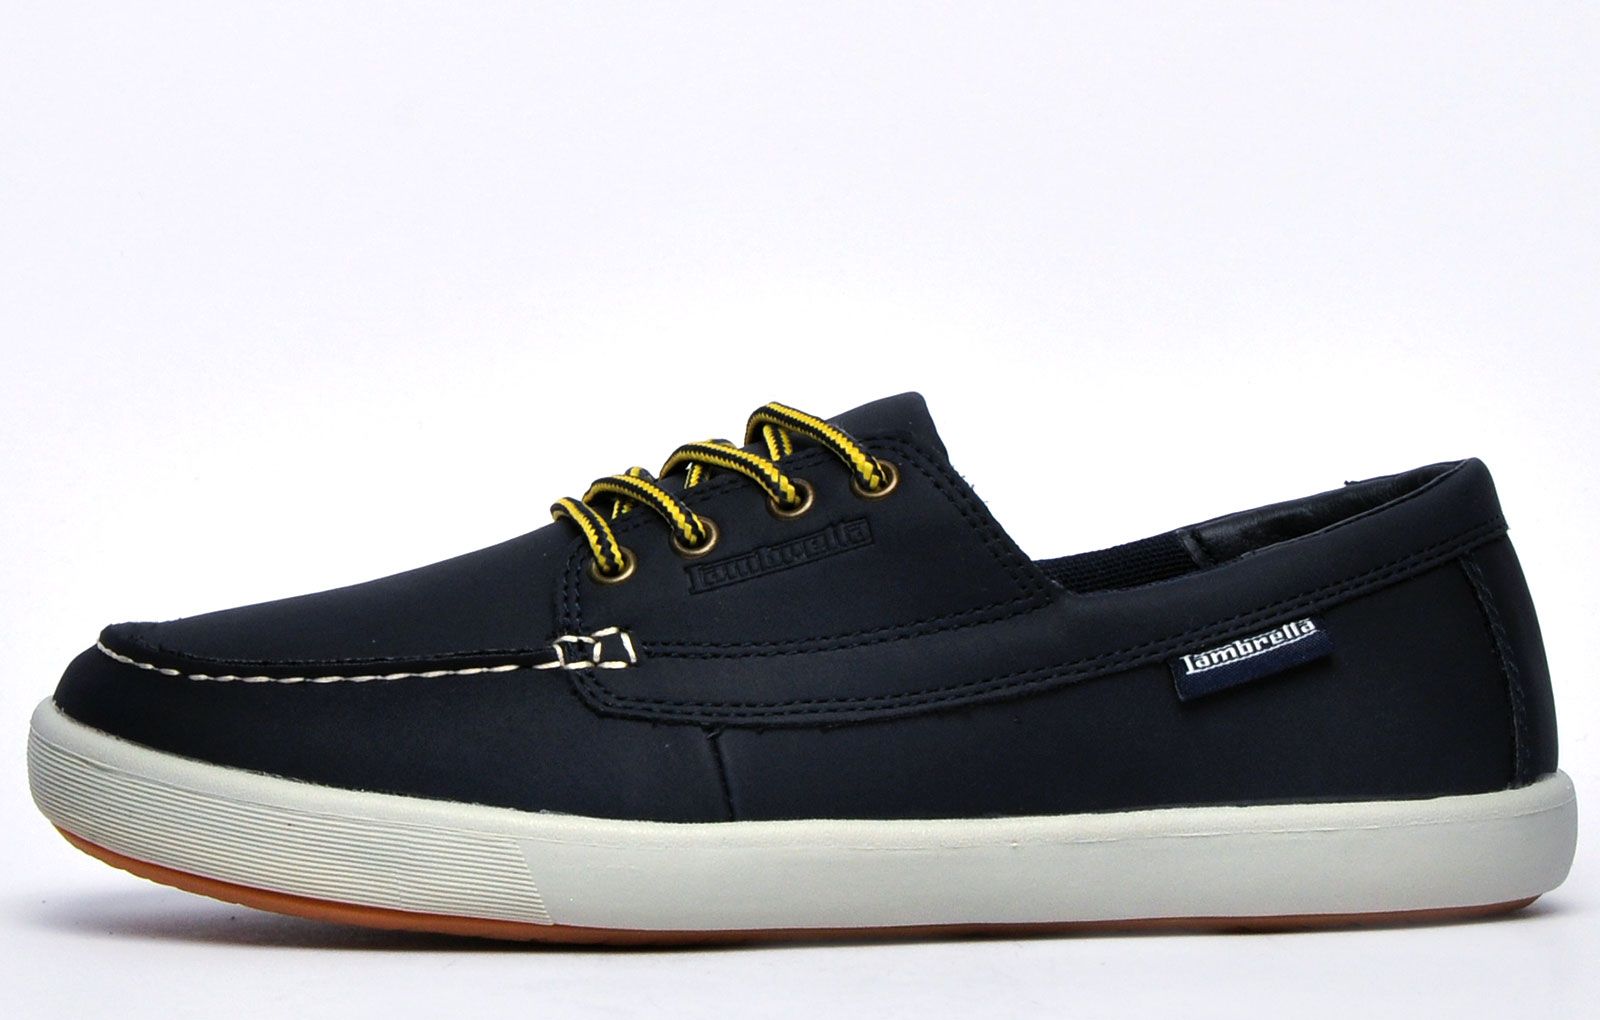 These Lambretta Vulcan Boater deck style shoes have been created with high end leather lookalike upper and a soft inner creating an on-trend style setting the bar this season.
 Finished off with neat designer stitch detailing throughout for a sophisticated finish and a soft, highly cushioned memory foam footbed and durable rubber outsole meaning youll get great wear and serious comfort out of these shoes for many seasons to come.
 - Premium leather lookalike upper
 - 4 Eyelet rope lace fastening
 - Intricate designer stitch detailing
 - Durable rubber outsole
 - Lightly padded heel and ankle collar
 - Lambretta branding throughout